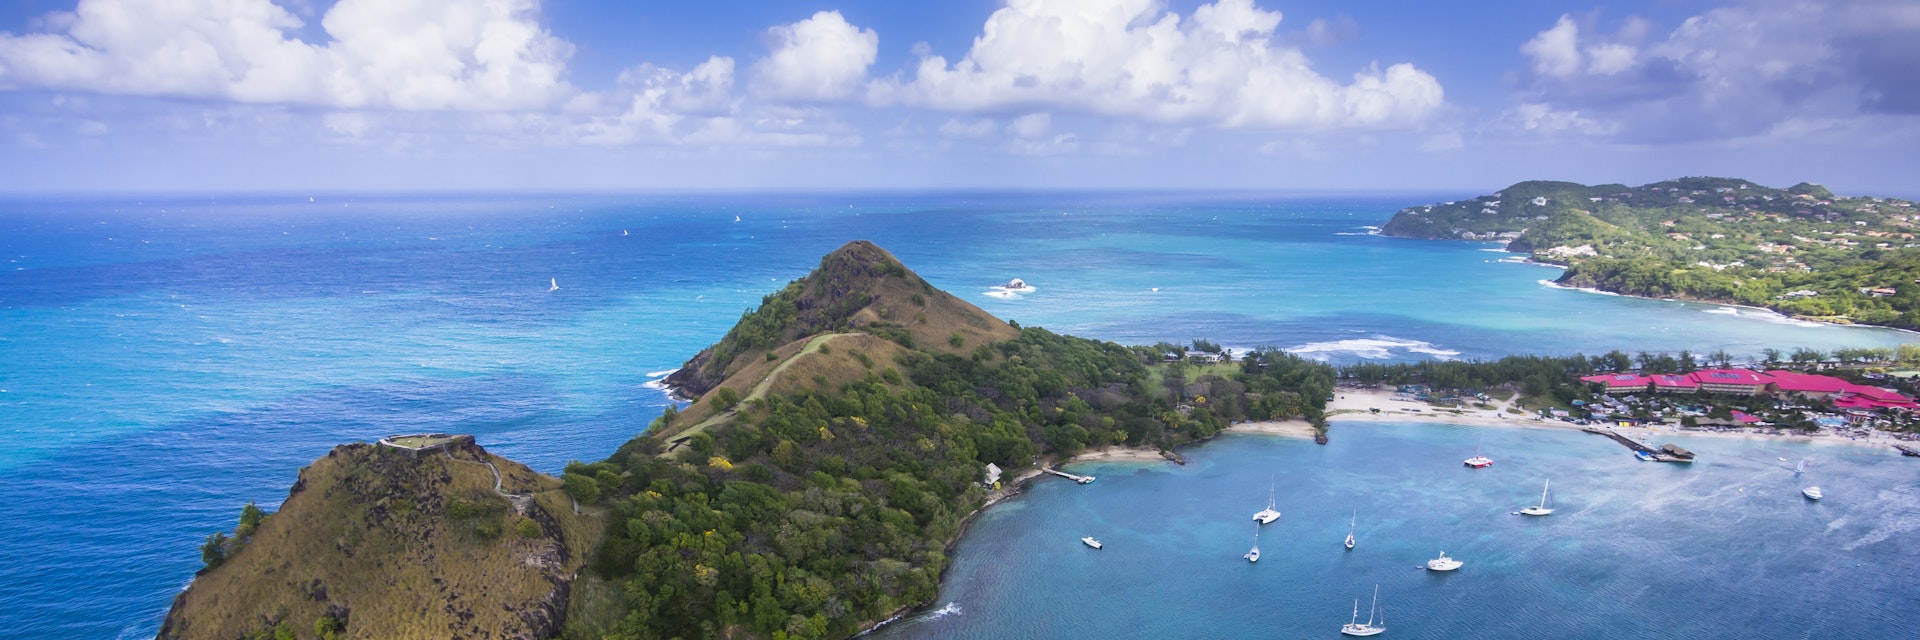 Caribbean, St. Lucia, Cap Estate, Pigeon Island National Park and Fort Rodney